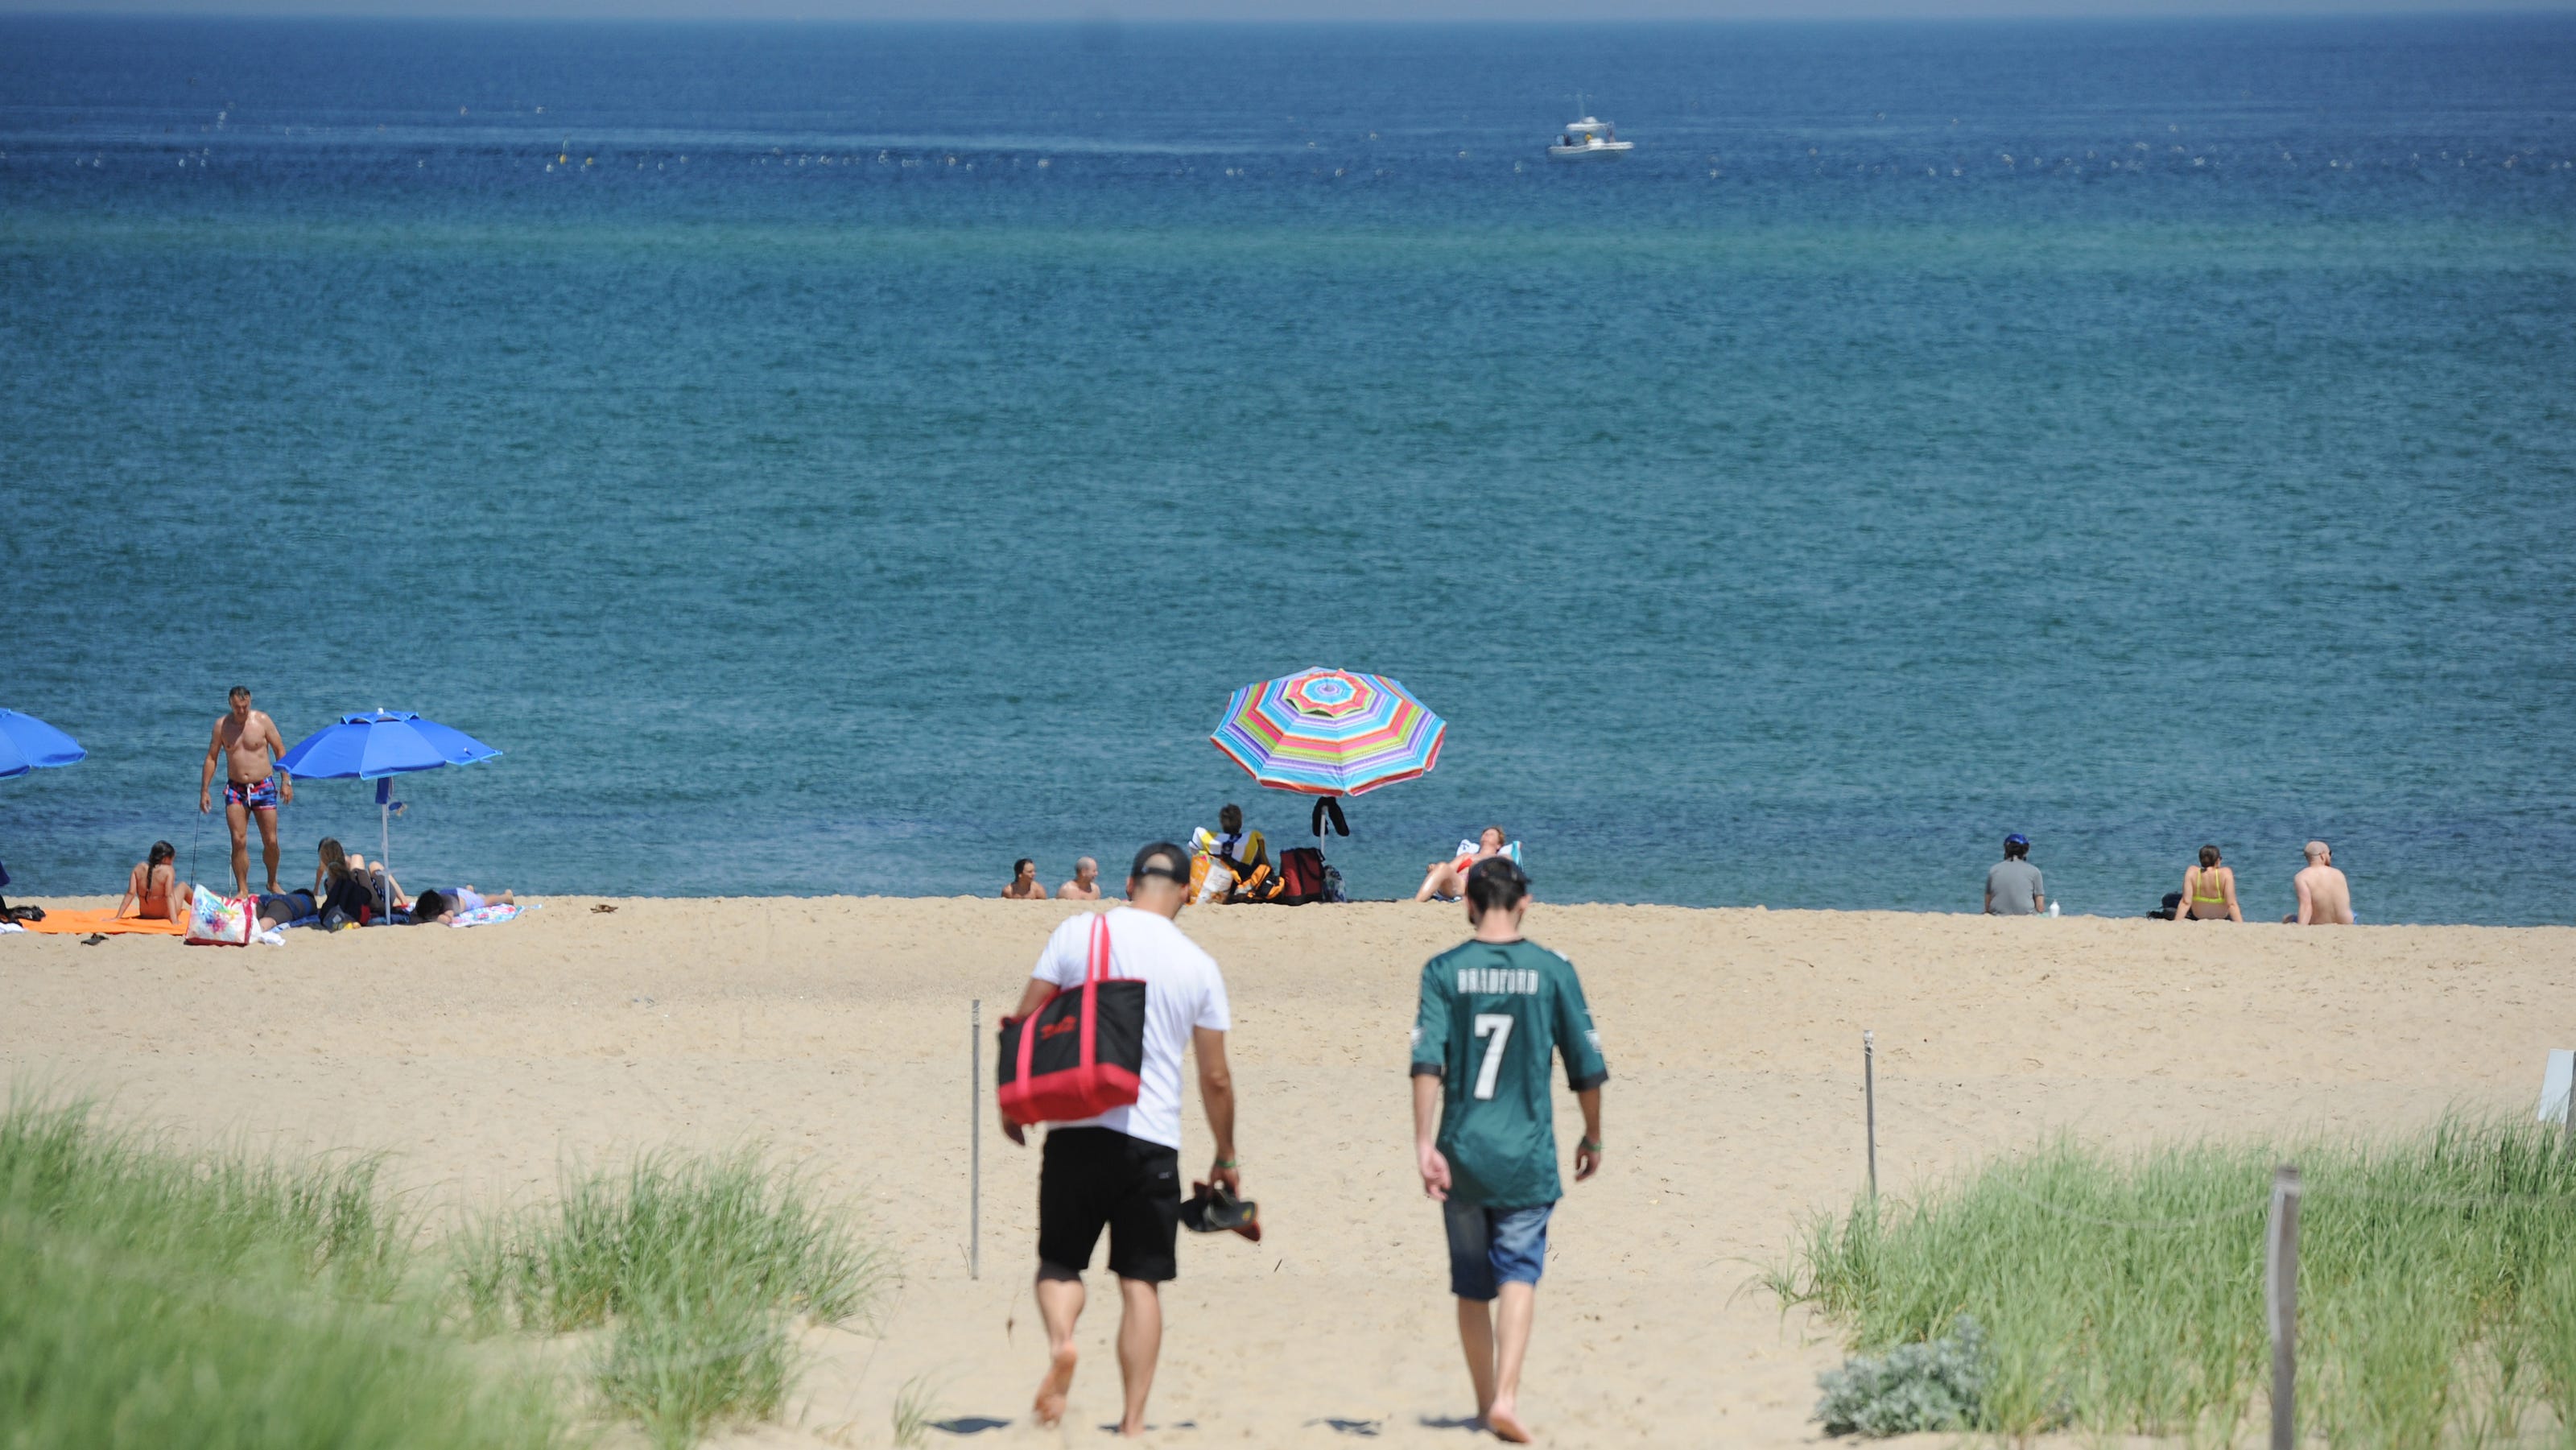 Two free August 2021 beach days at Cape Cod National Seashore